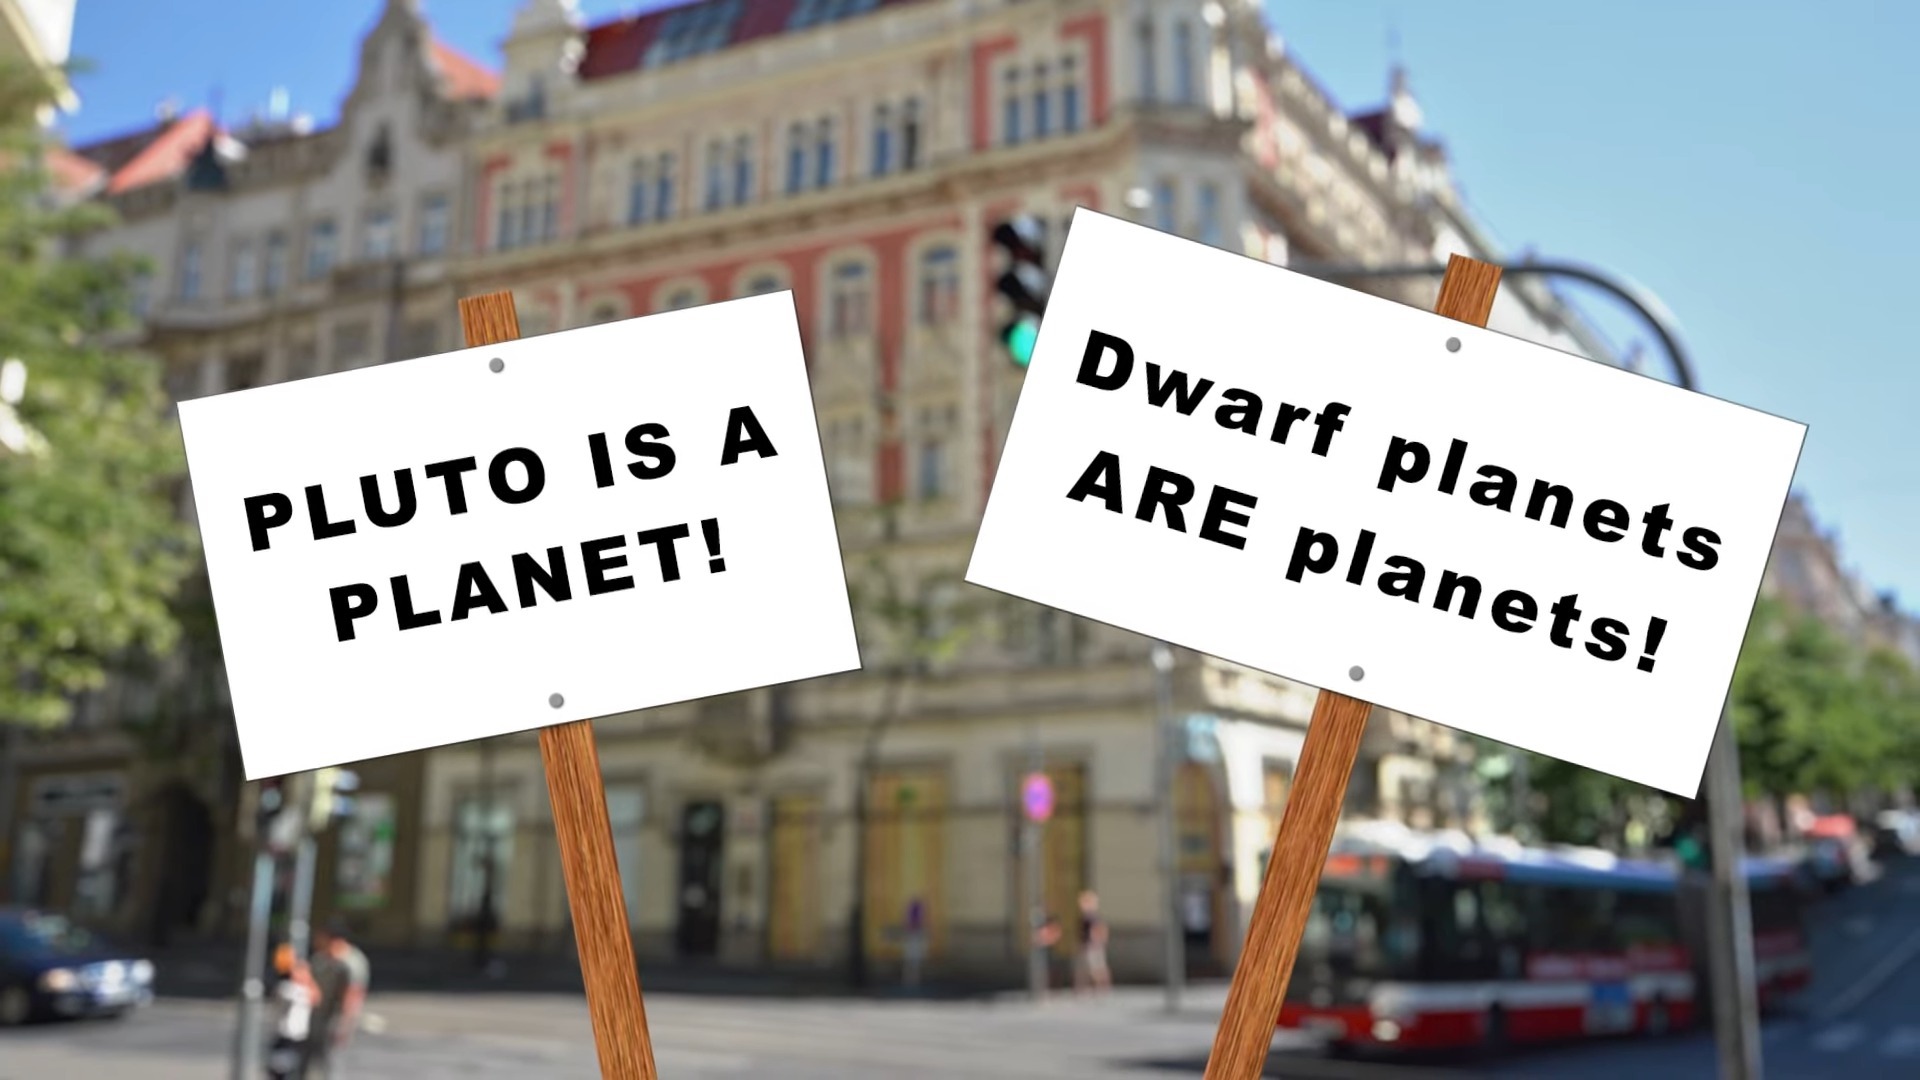 An illustration with two signs in front of a building. The signs support Pluto and dwarf planets.